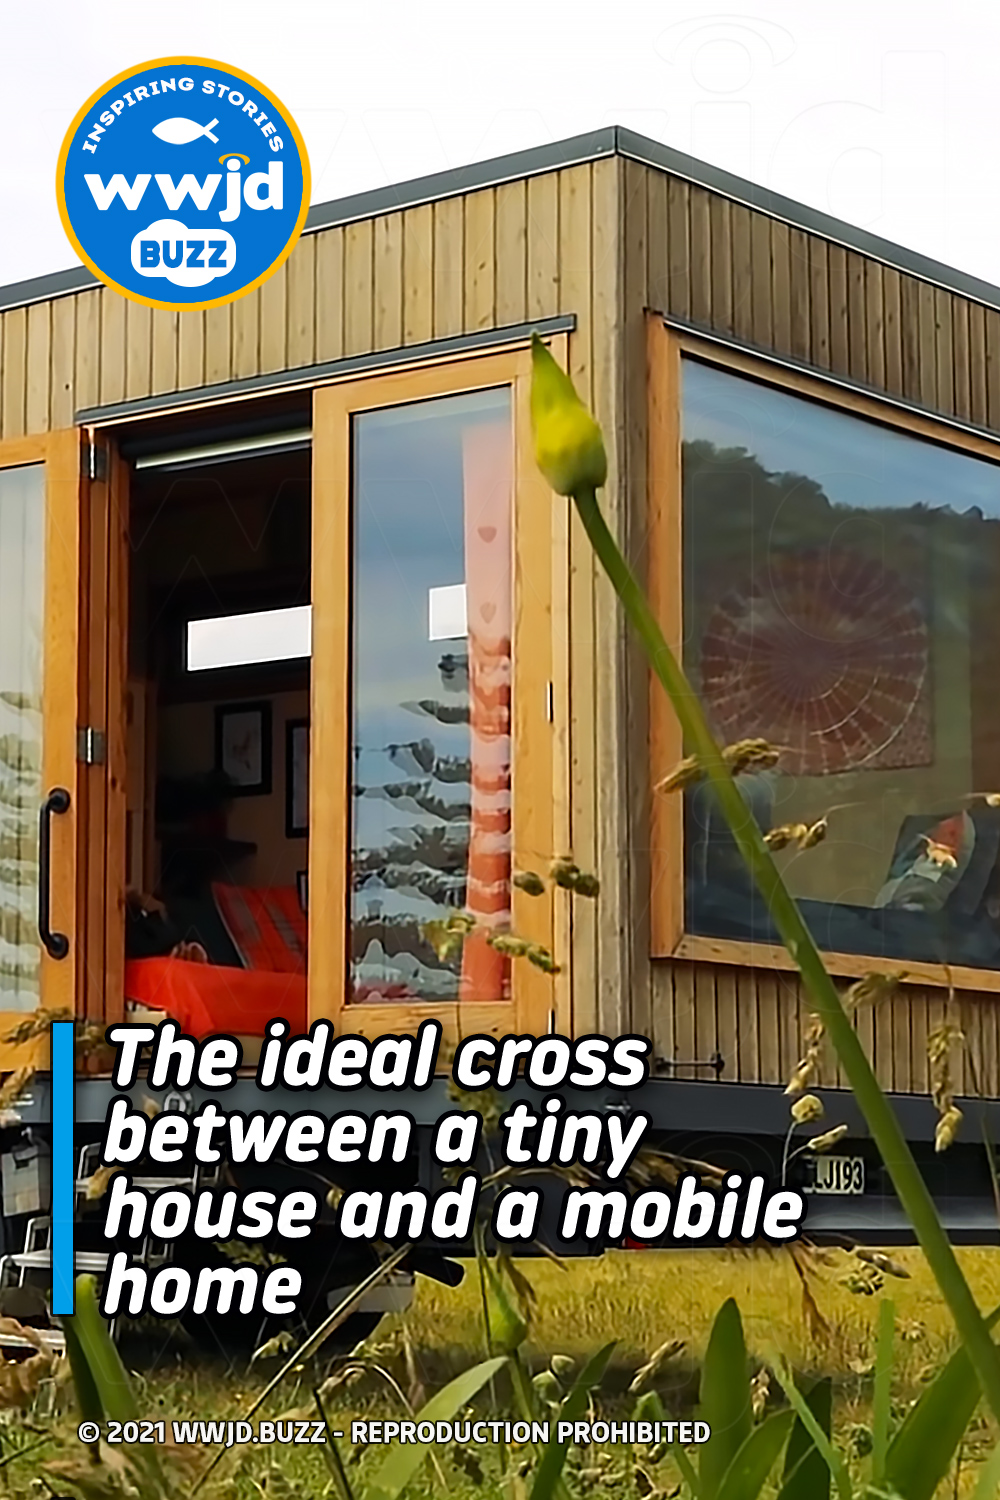 The ideal cross between a tiny house and a mobile home